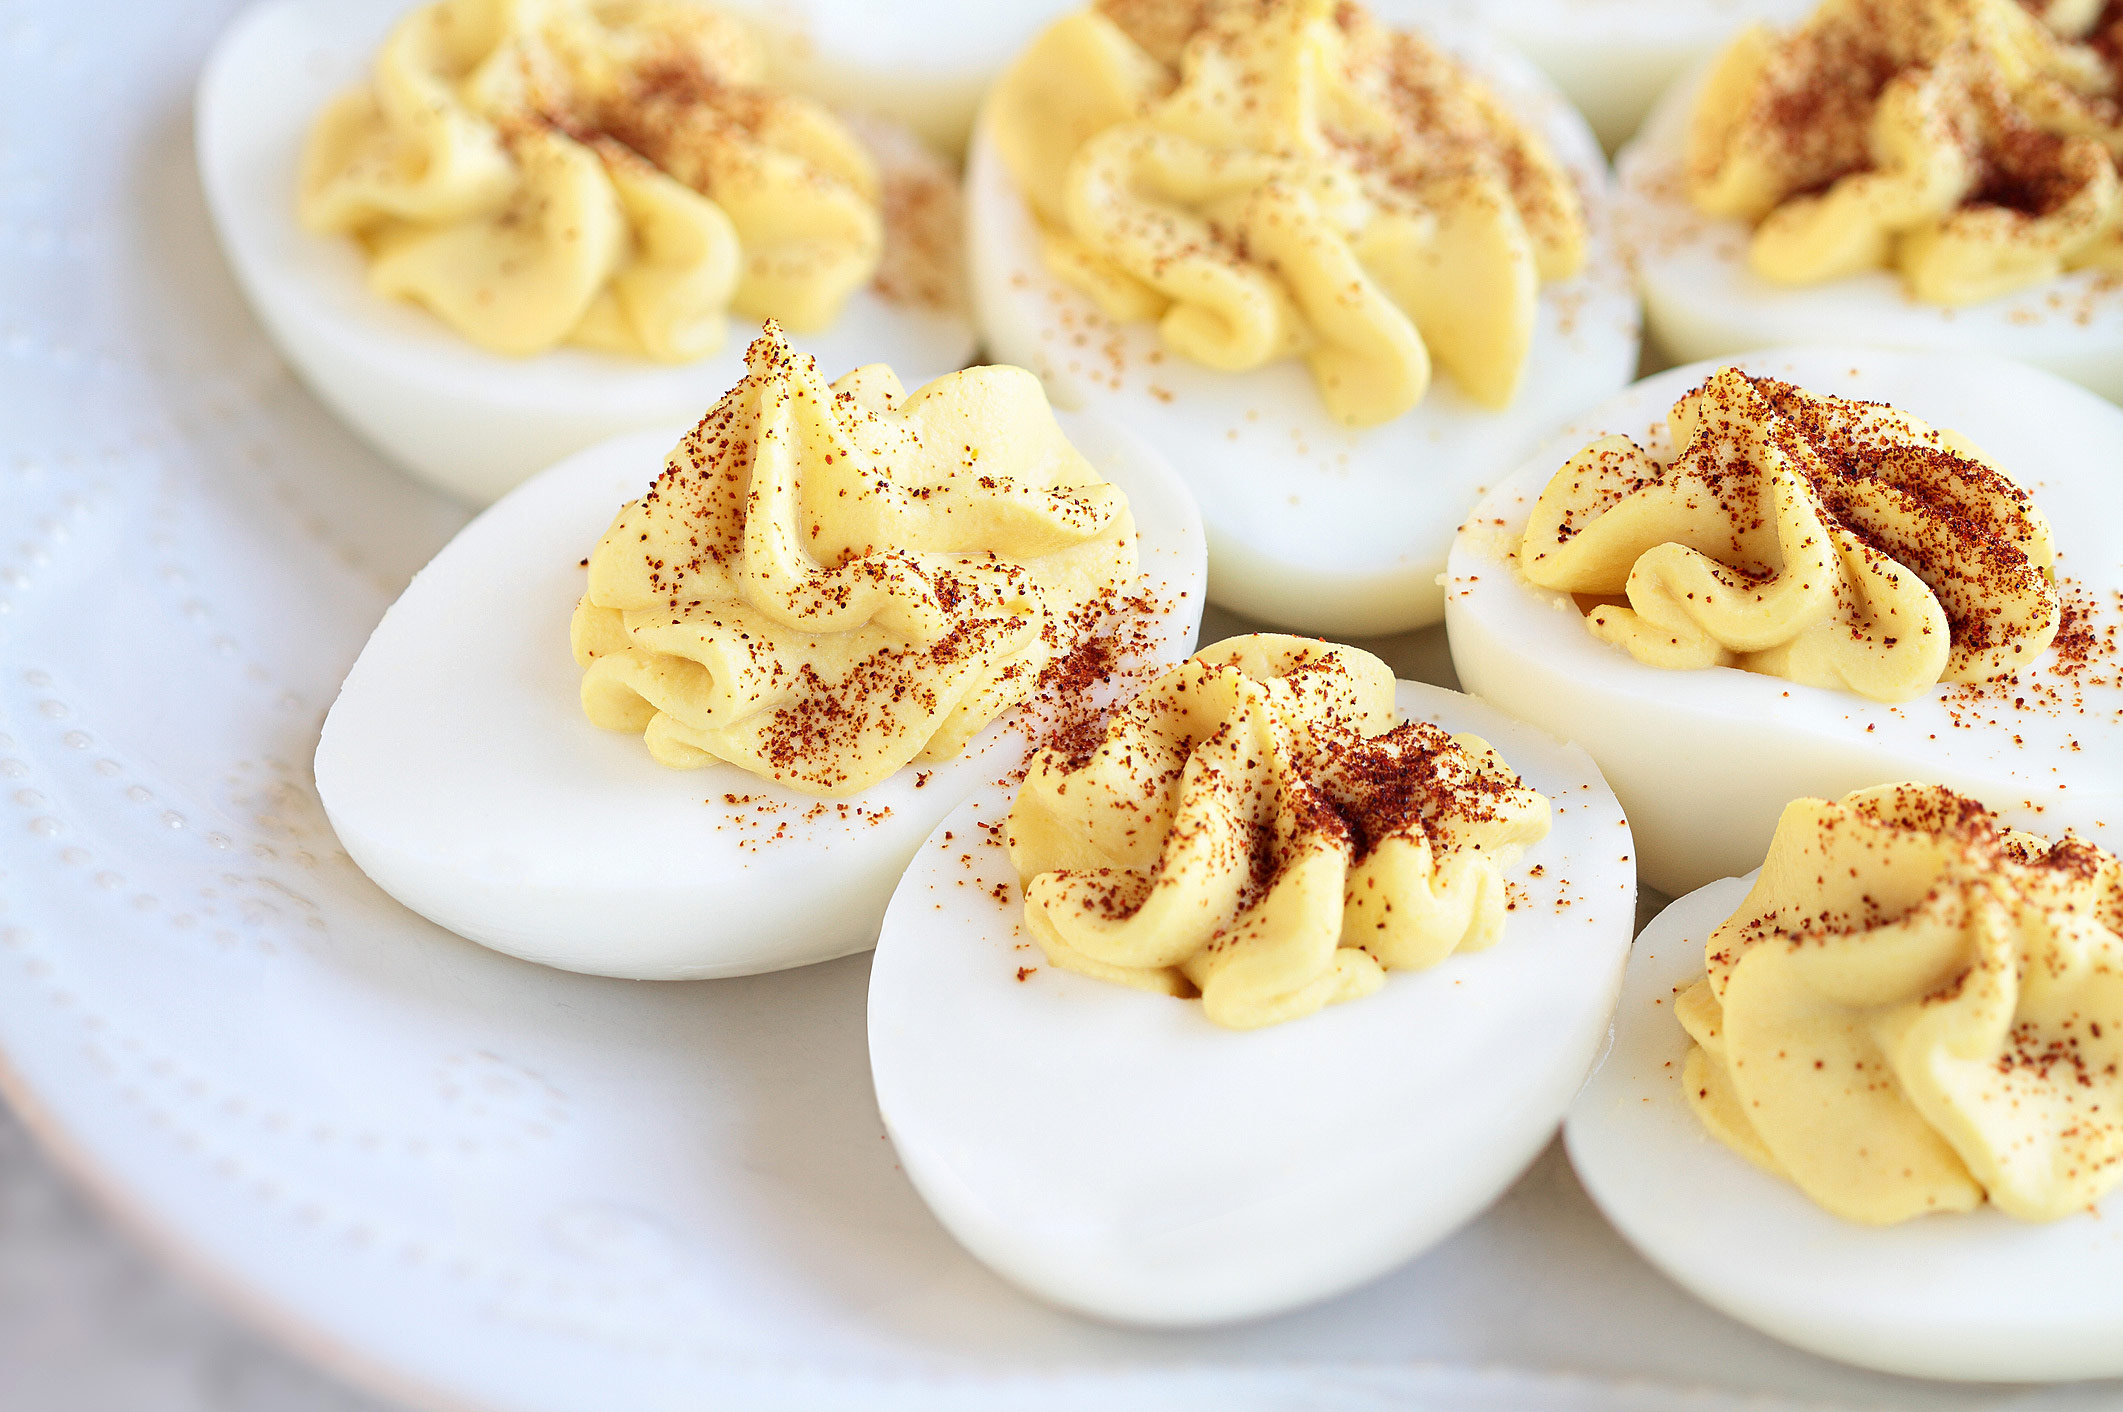 Hard boiled eggs sliced in half and filled with the yolk mixture and sprinkled with paprika; Old Fashioned Deviled Eggs and Perfectly Cooked Eggs; 2023 Jane Bonacci, The Heritage Cook.